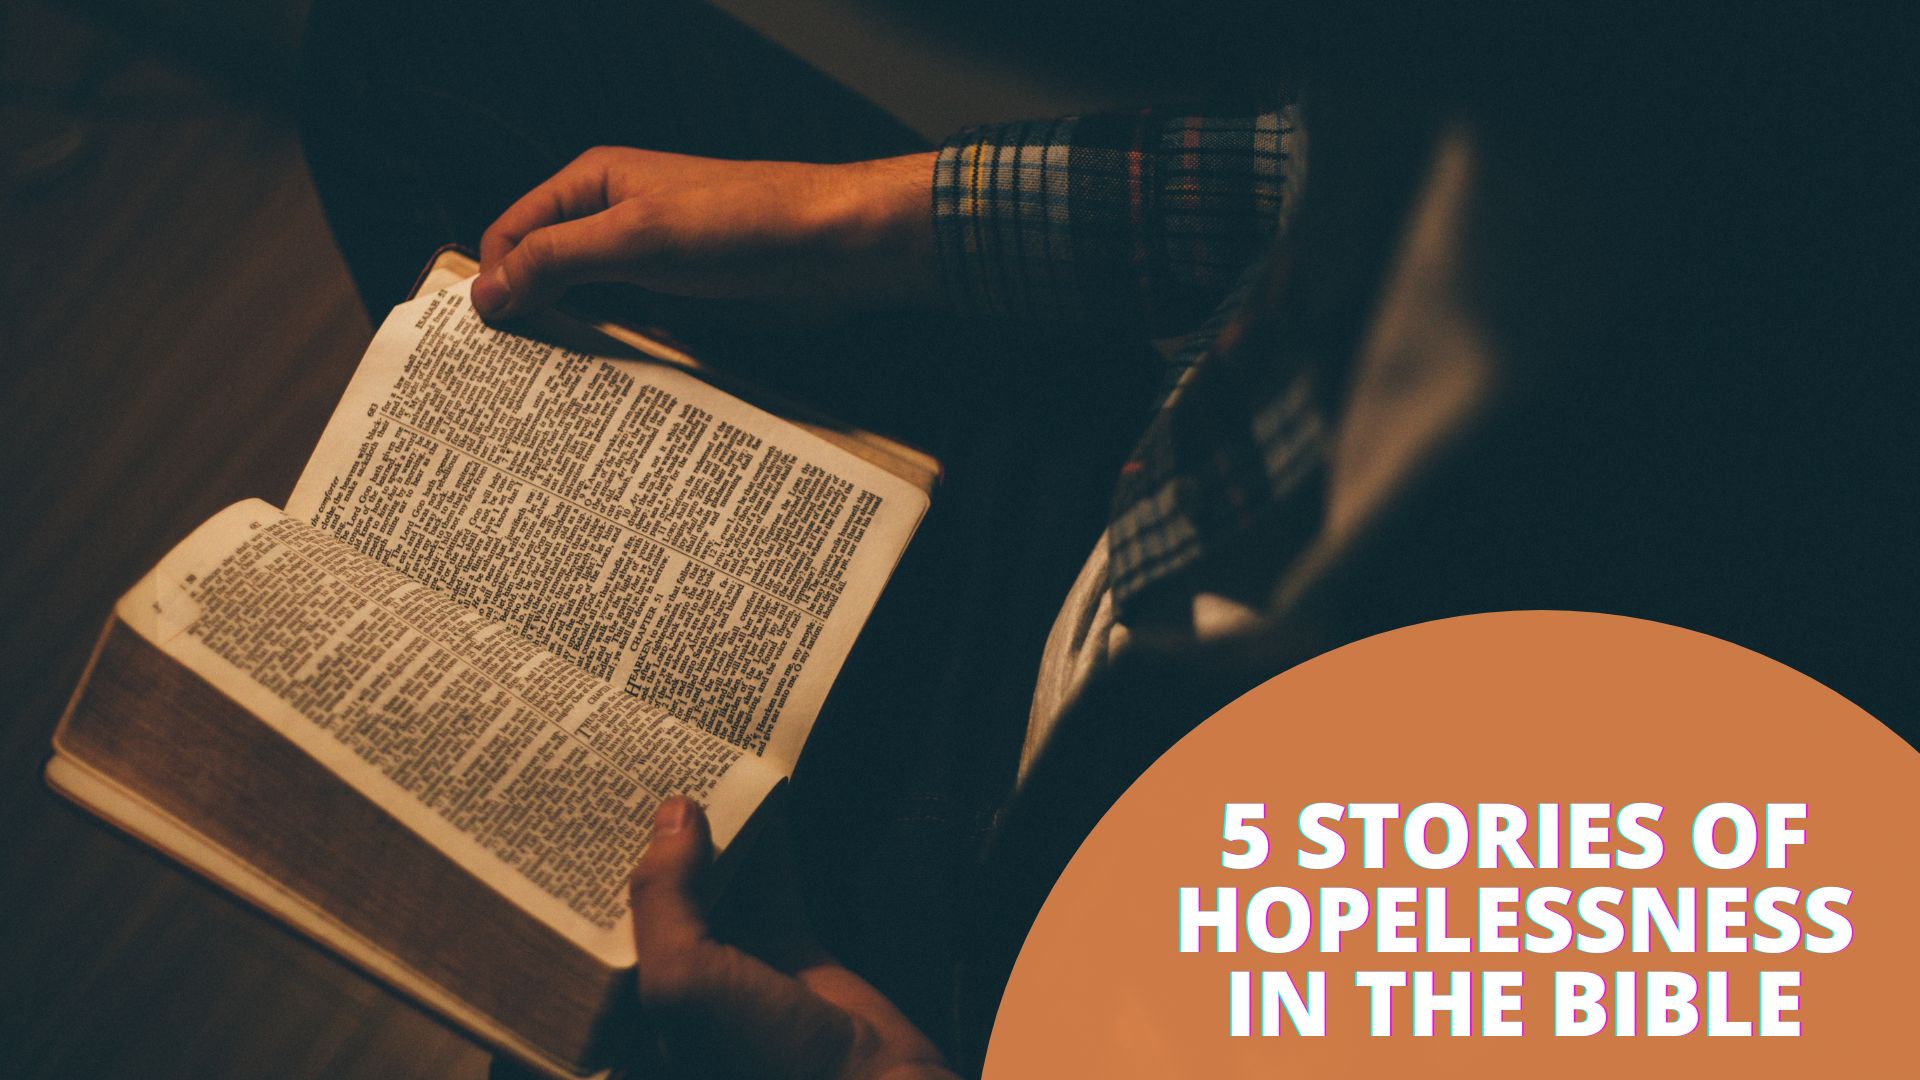 5 Stories of Hopelessness in the Bible